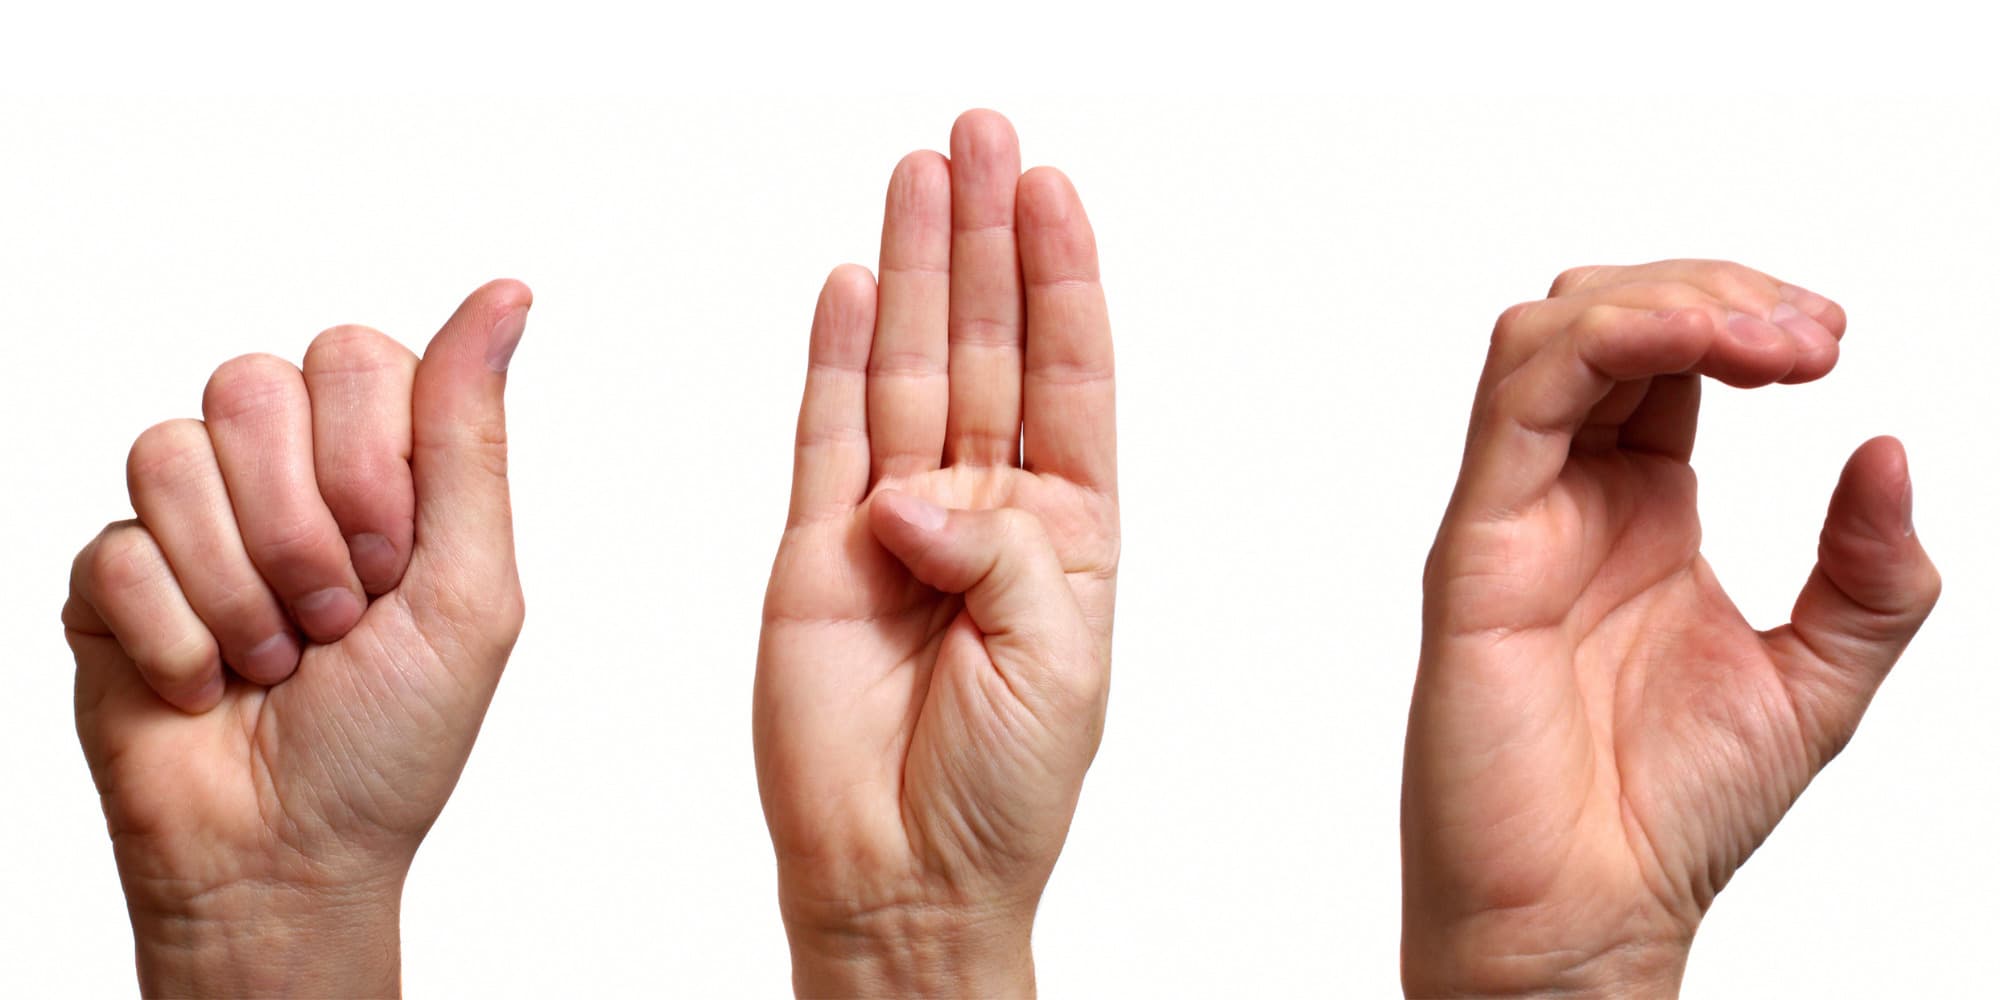 Three hands each showing the letters "ABC" in sign language.